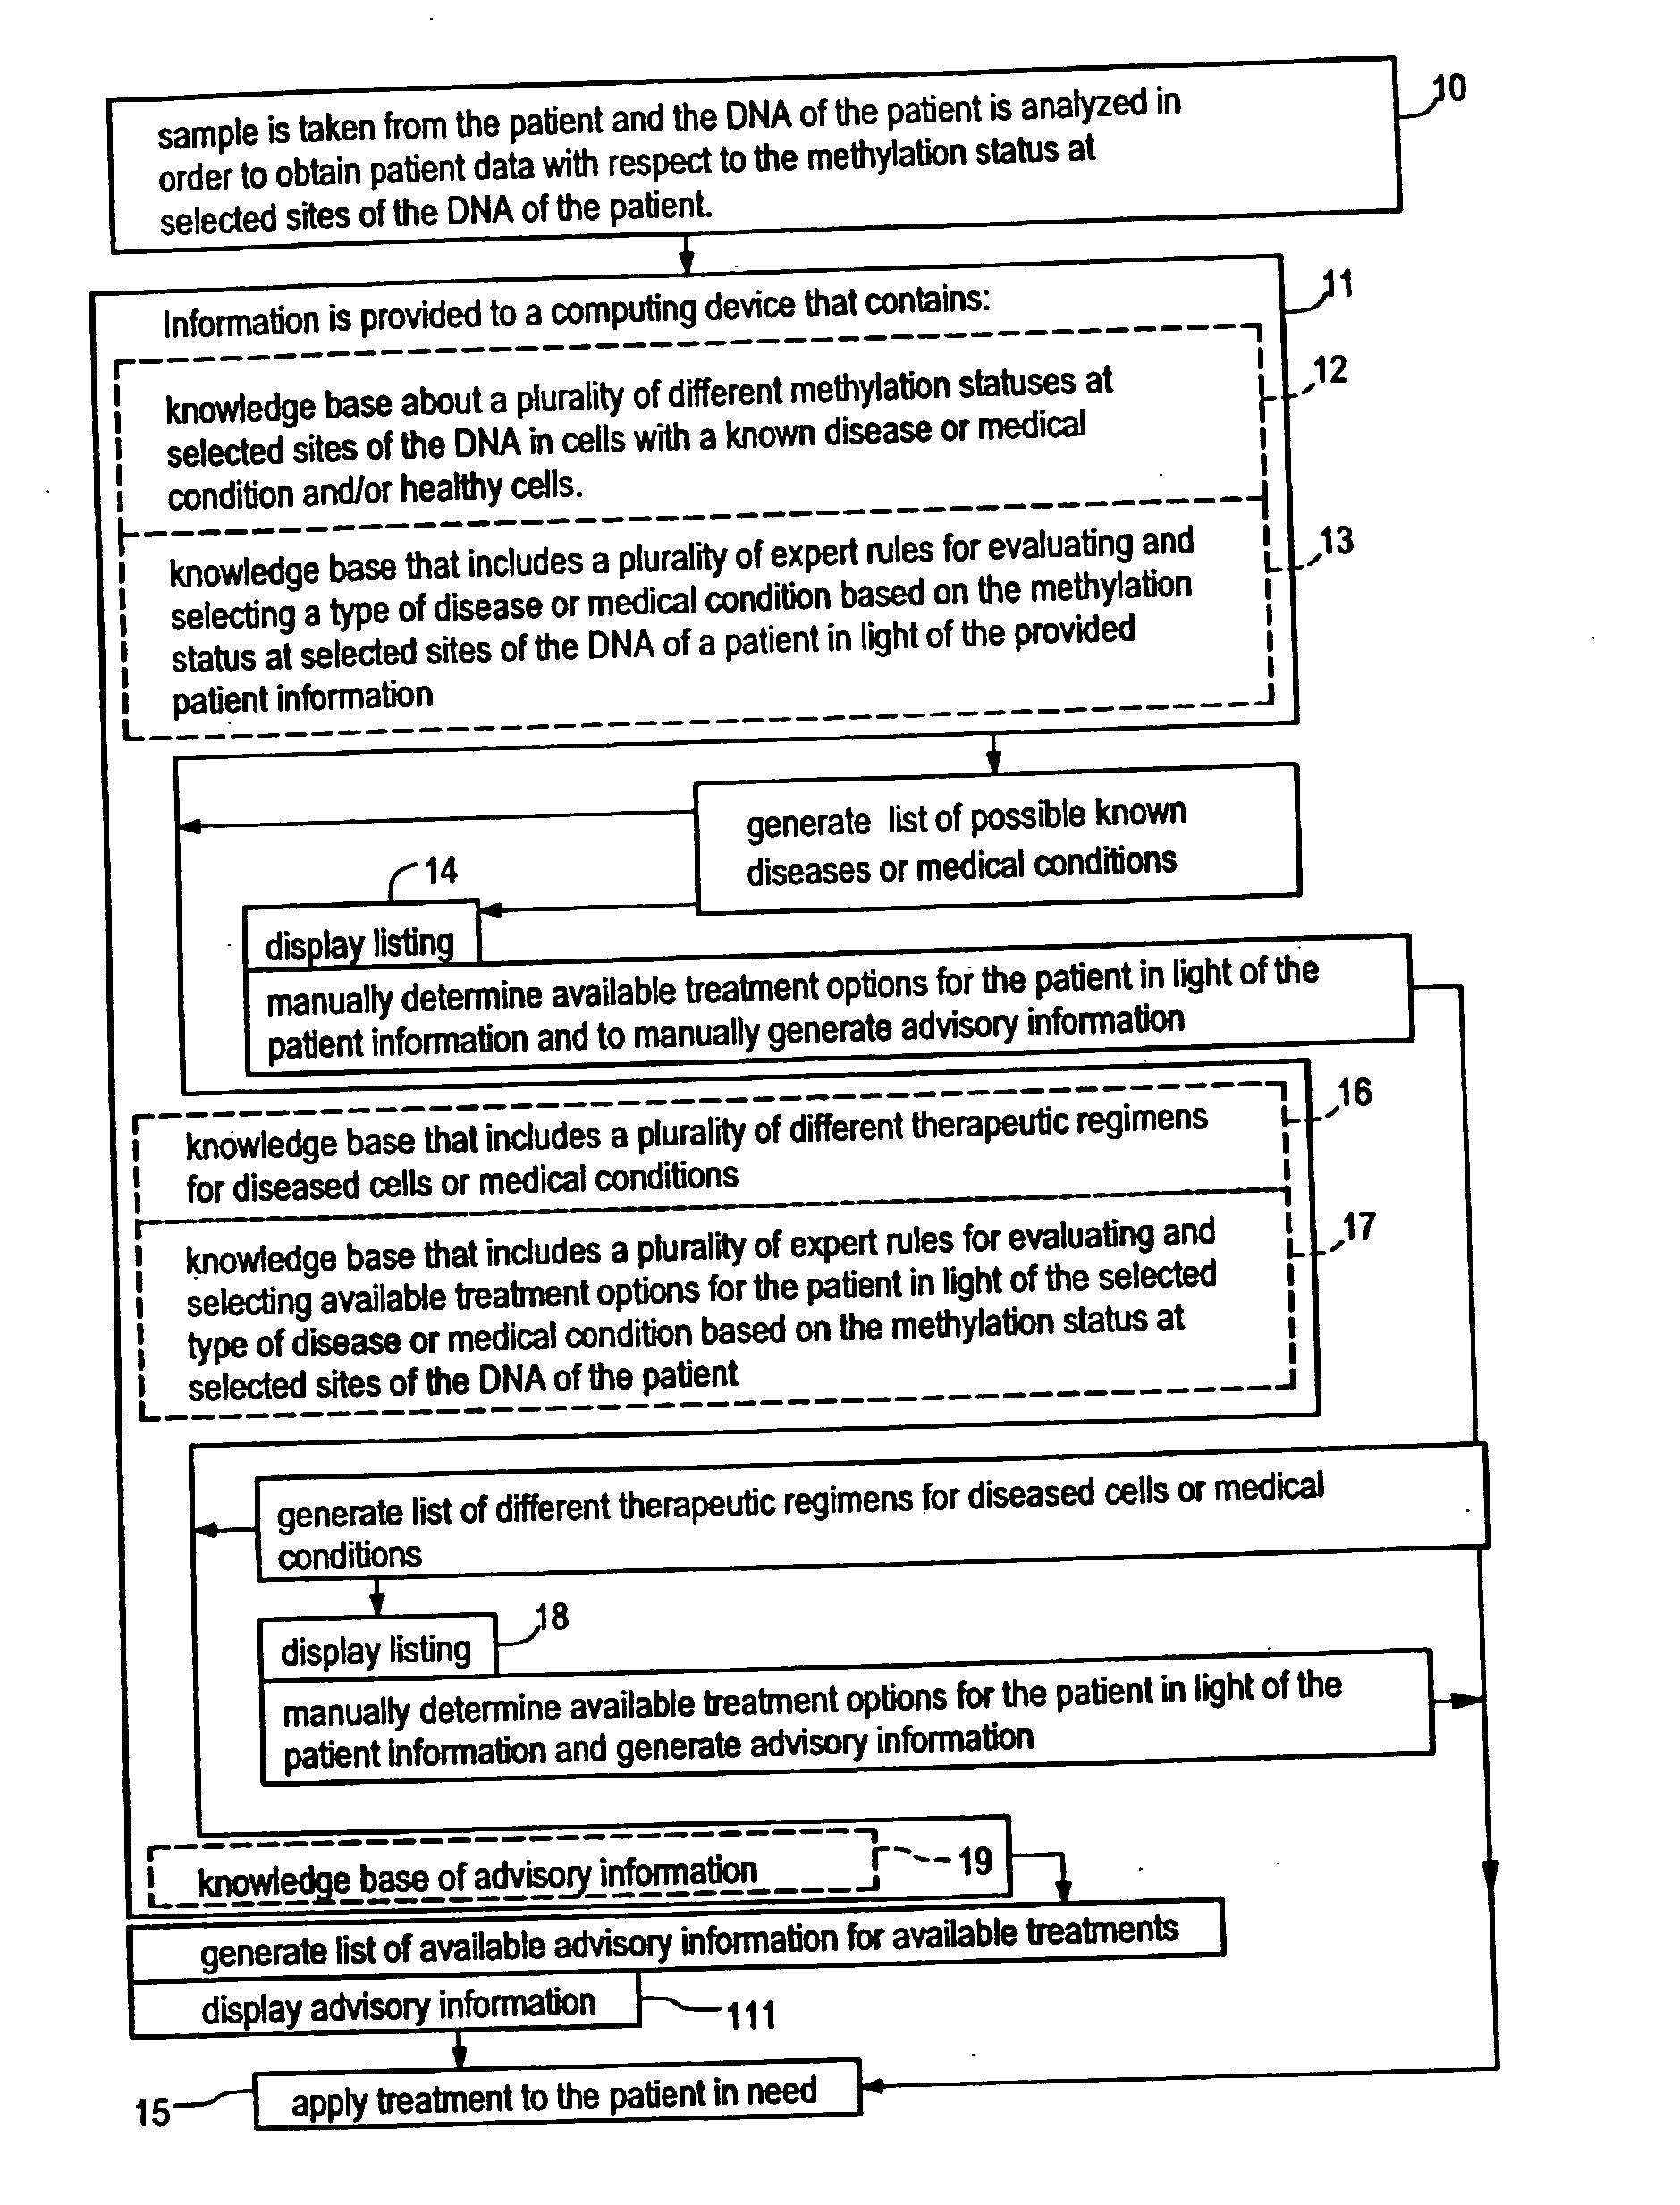 Systems, methods and computer program products for guiding selection of a therapeutic treatment regimen based on the methylation status of the DNA